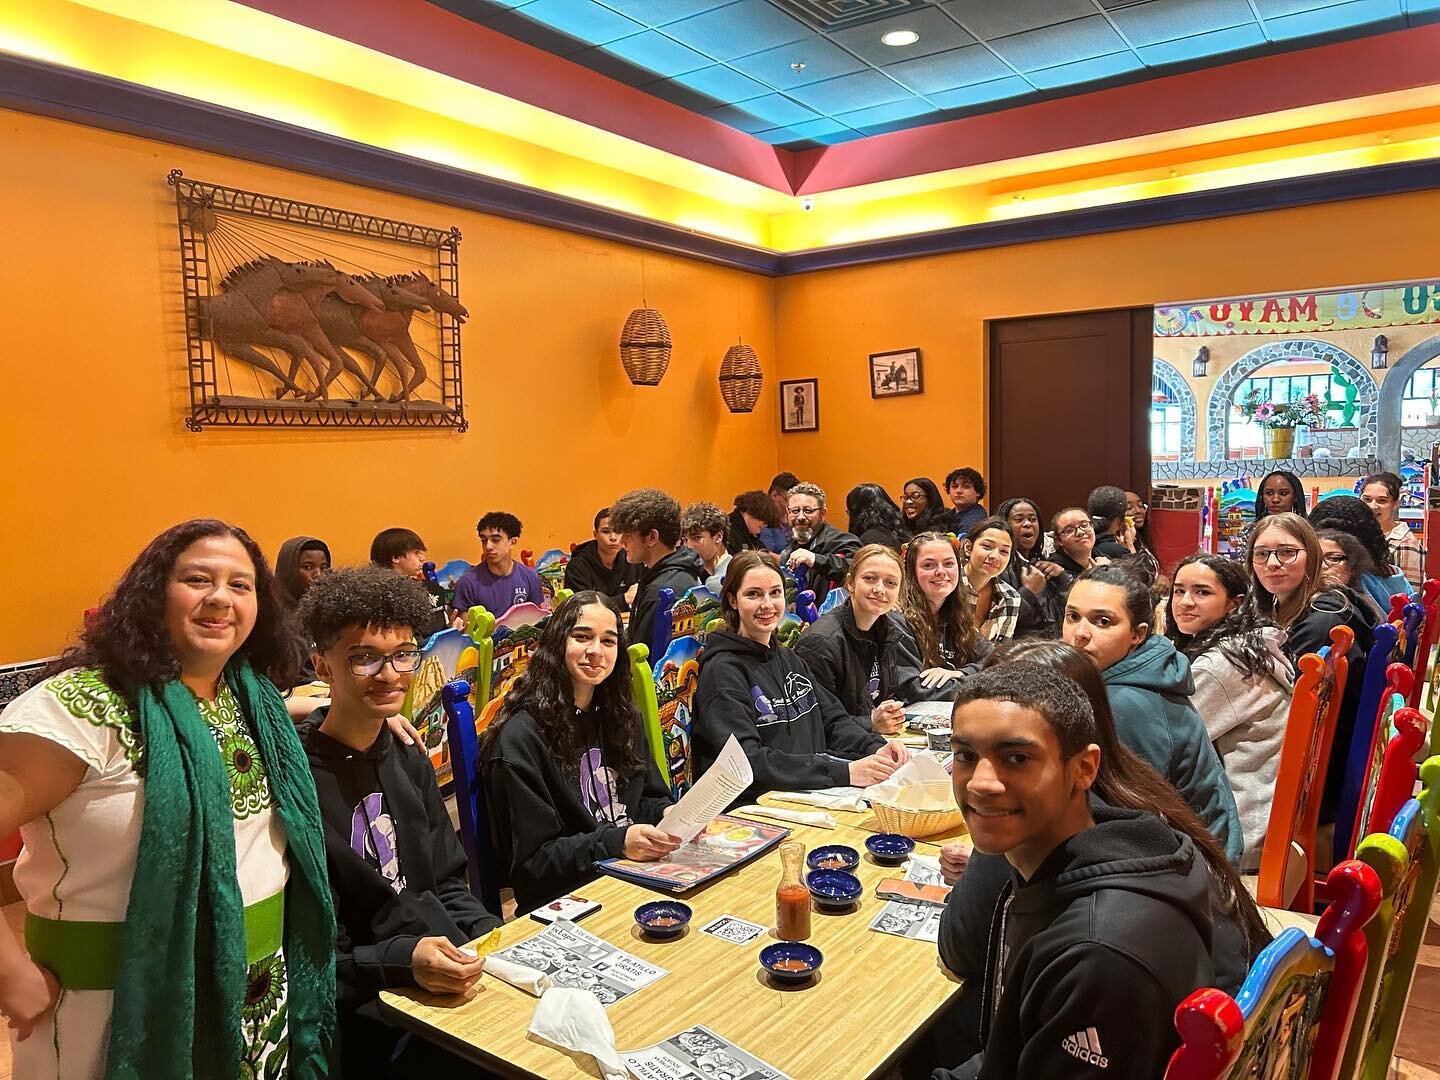 Our Spanish classes celebrated Cinco de Mayo at a local restaurant and had to order and converse in Spanish. Thank you Mrs. Vanegas for your work with our students. #serveloveachieve #sneceducation #snecyouth #sneconline #adventisteducation #cincodem